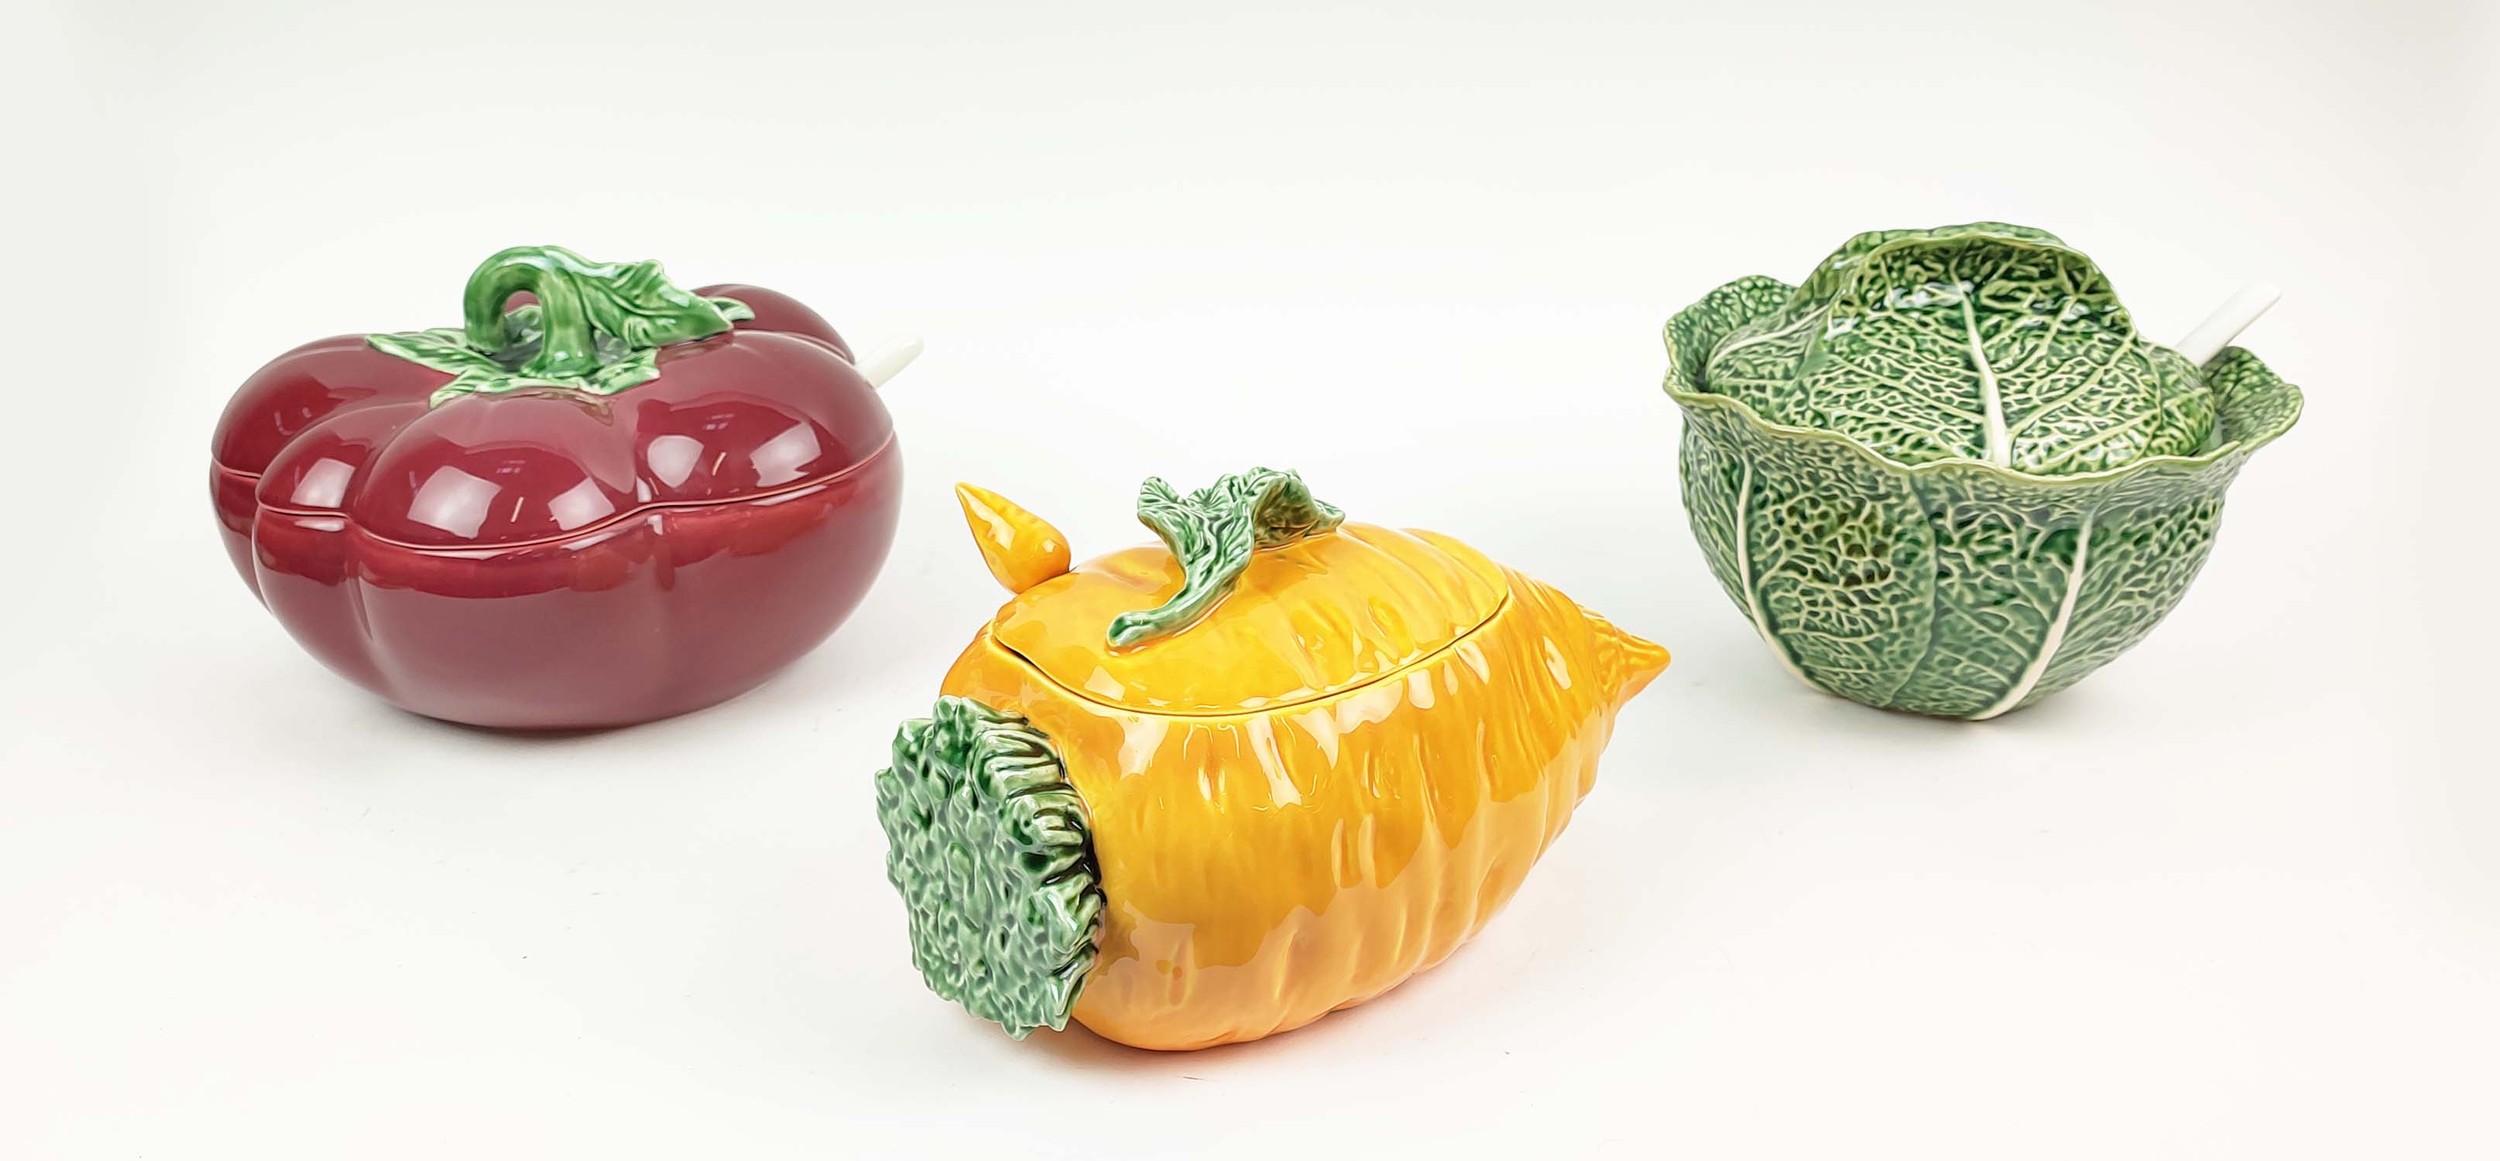 THREE LARGE CERAMIC TUREENS OF FRUIT AND VEGETABLE, in the form of tomato, cabbage and carrot, all